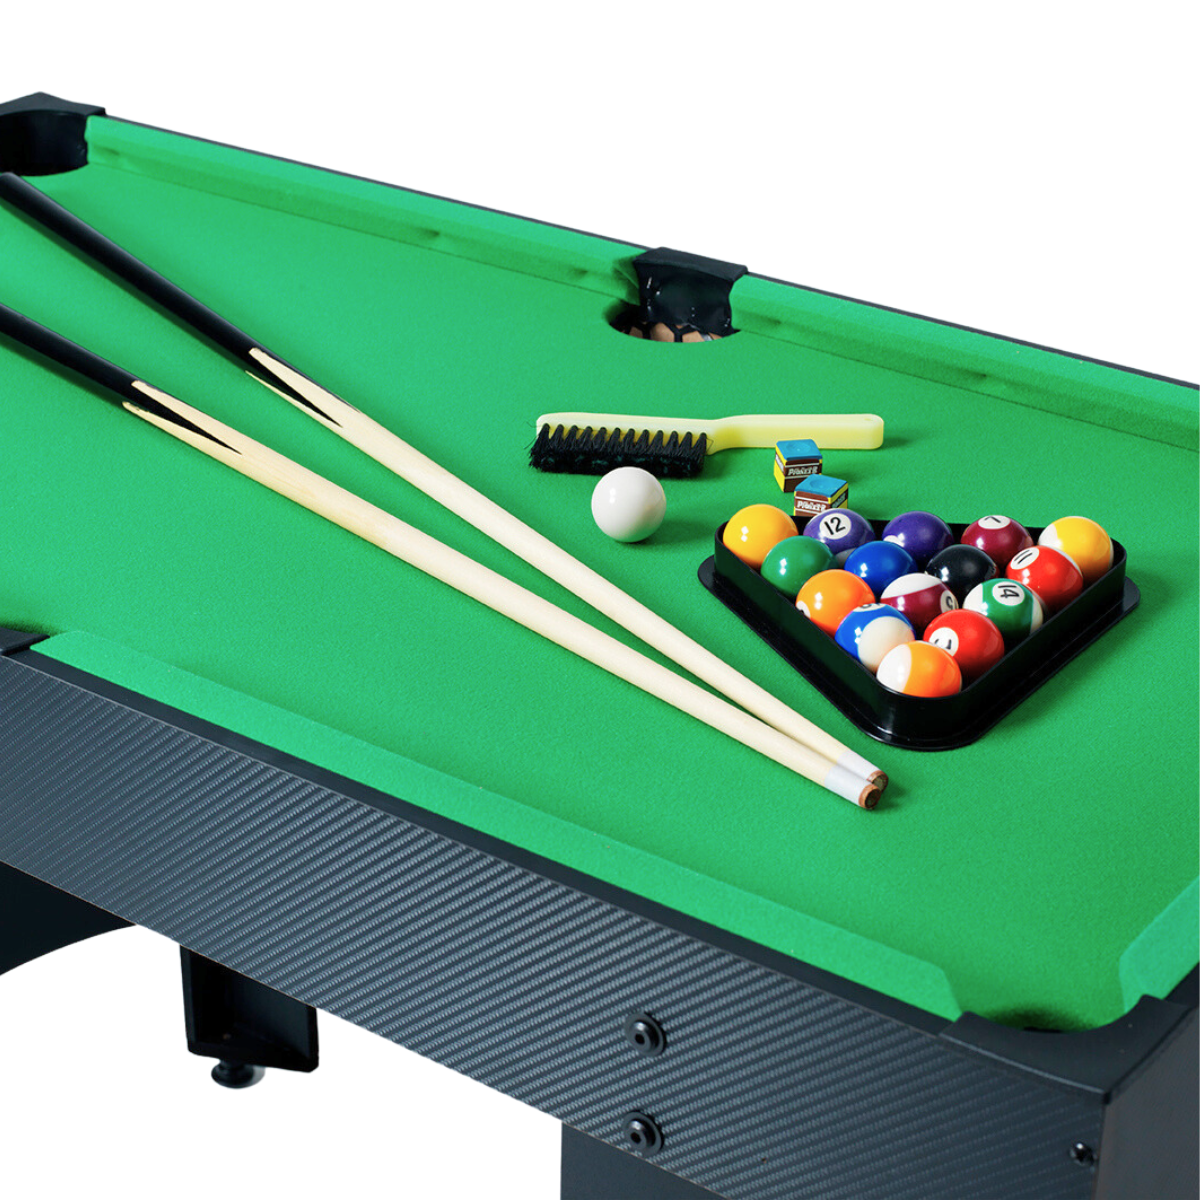 The UCLA 4ft Pool Table